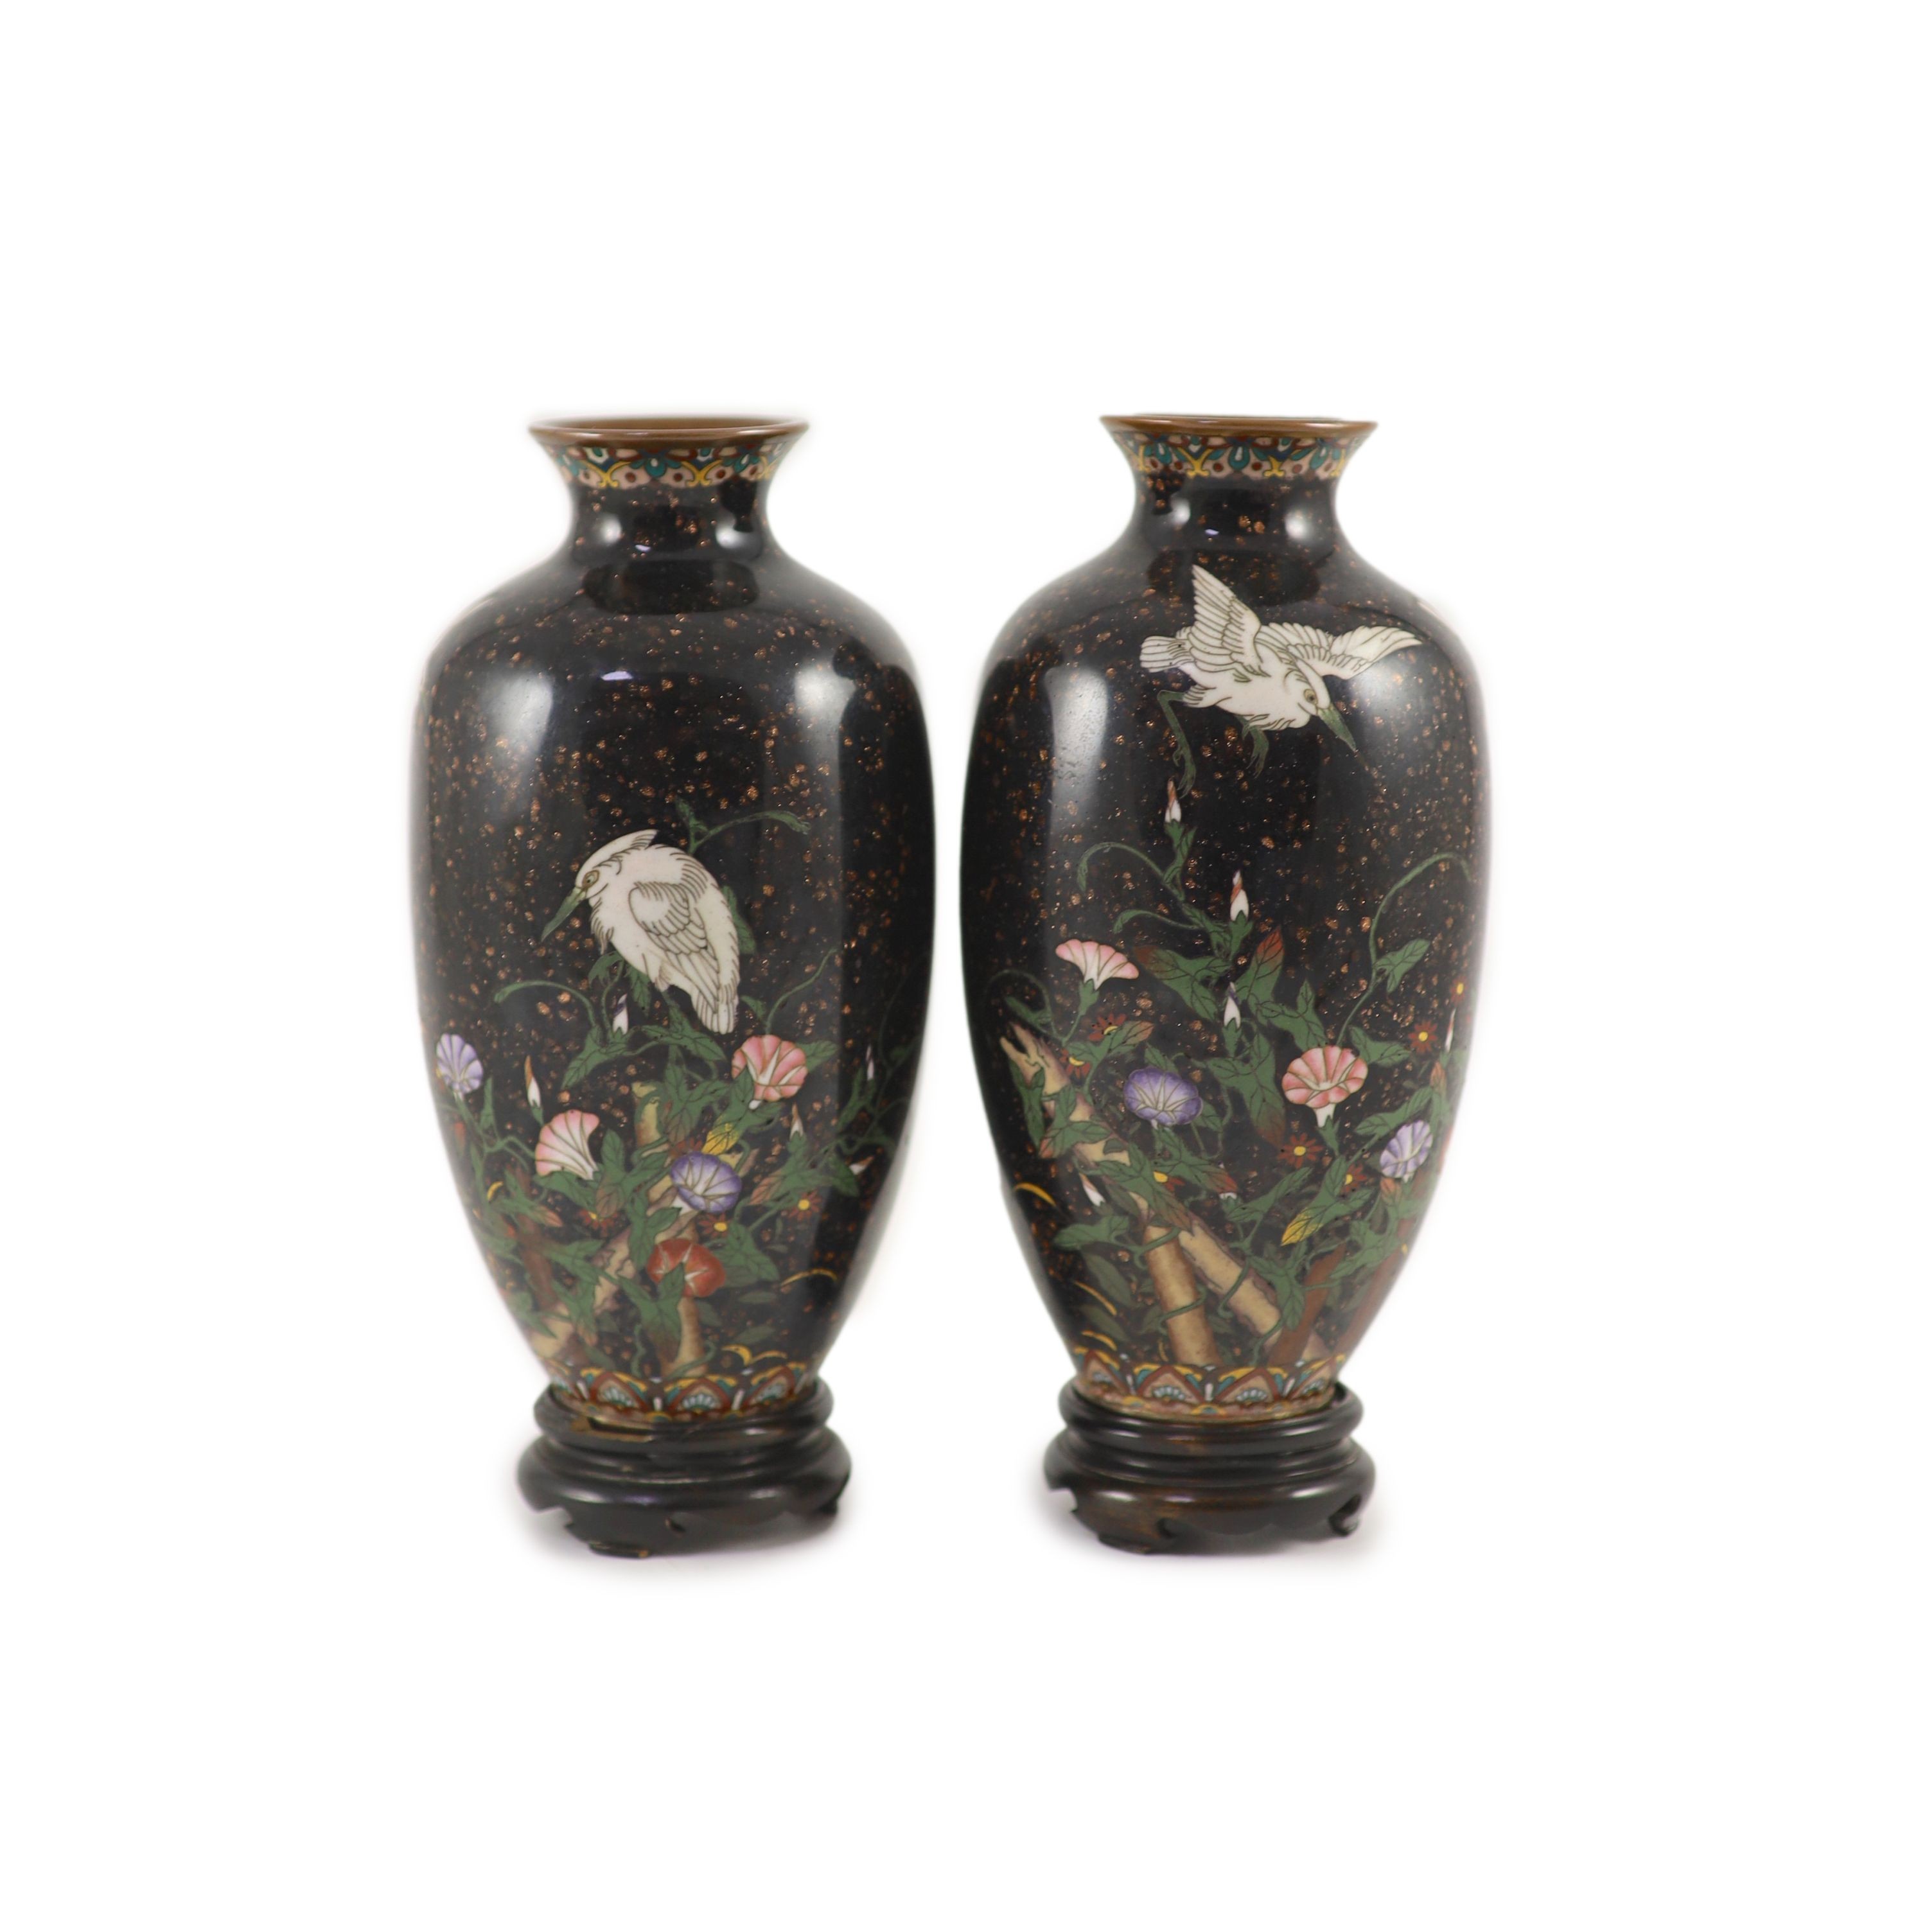 A pair of Japanese silver wire cloisonné enamel ‘egret’ vases, Meiji period, 18.5 cm high, wood stands                                                                                                                      